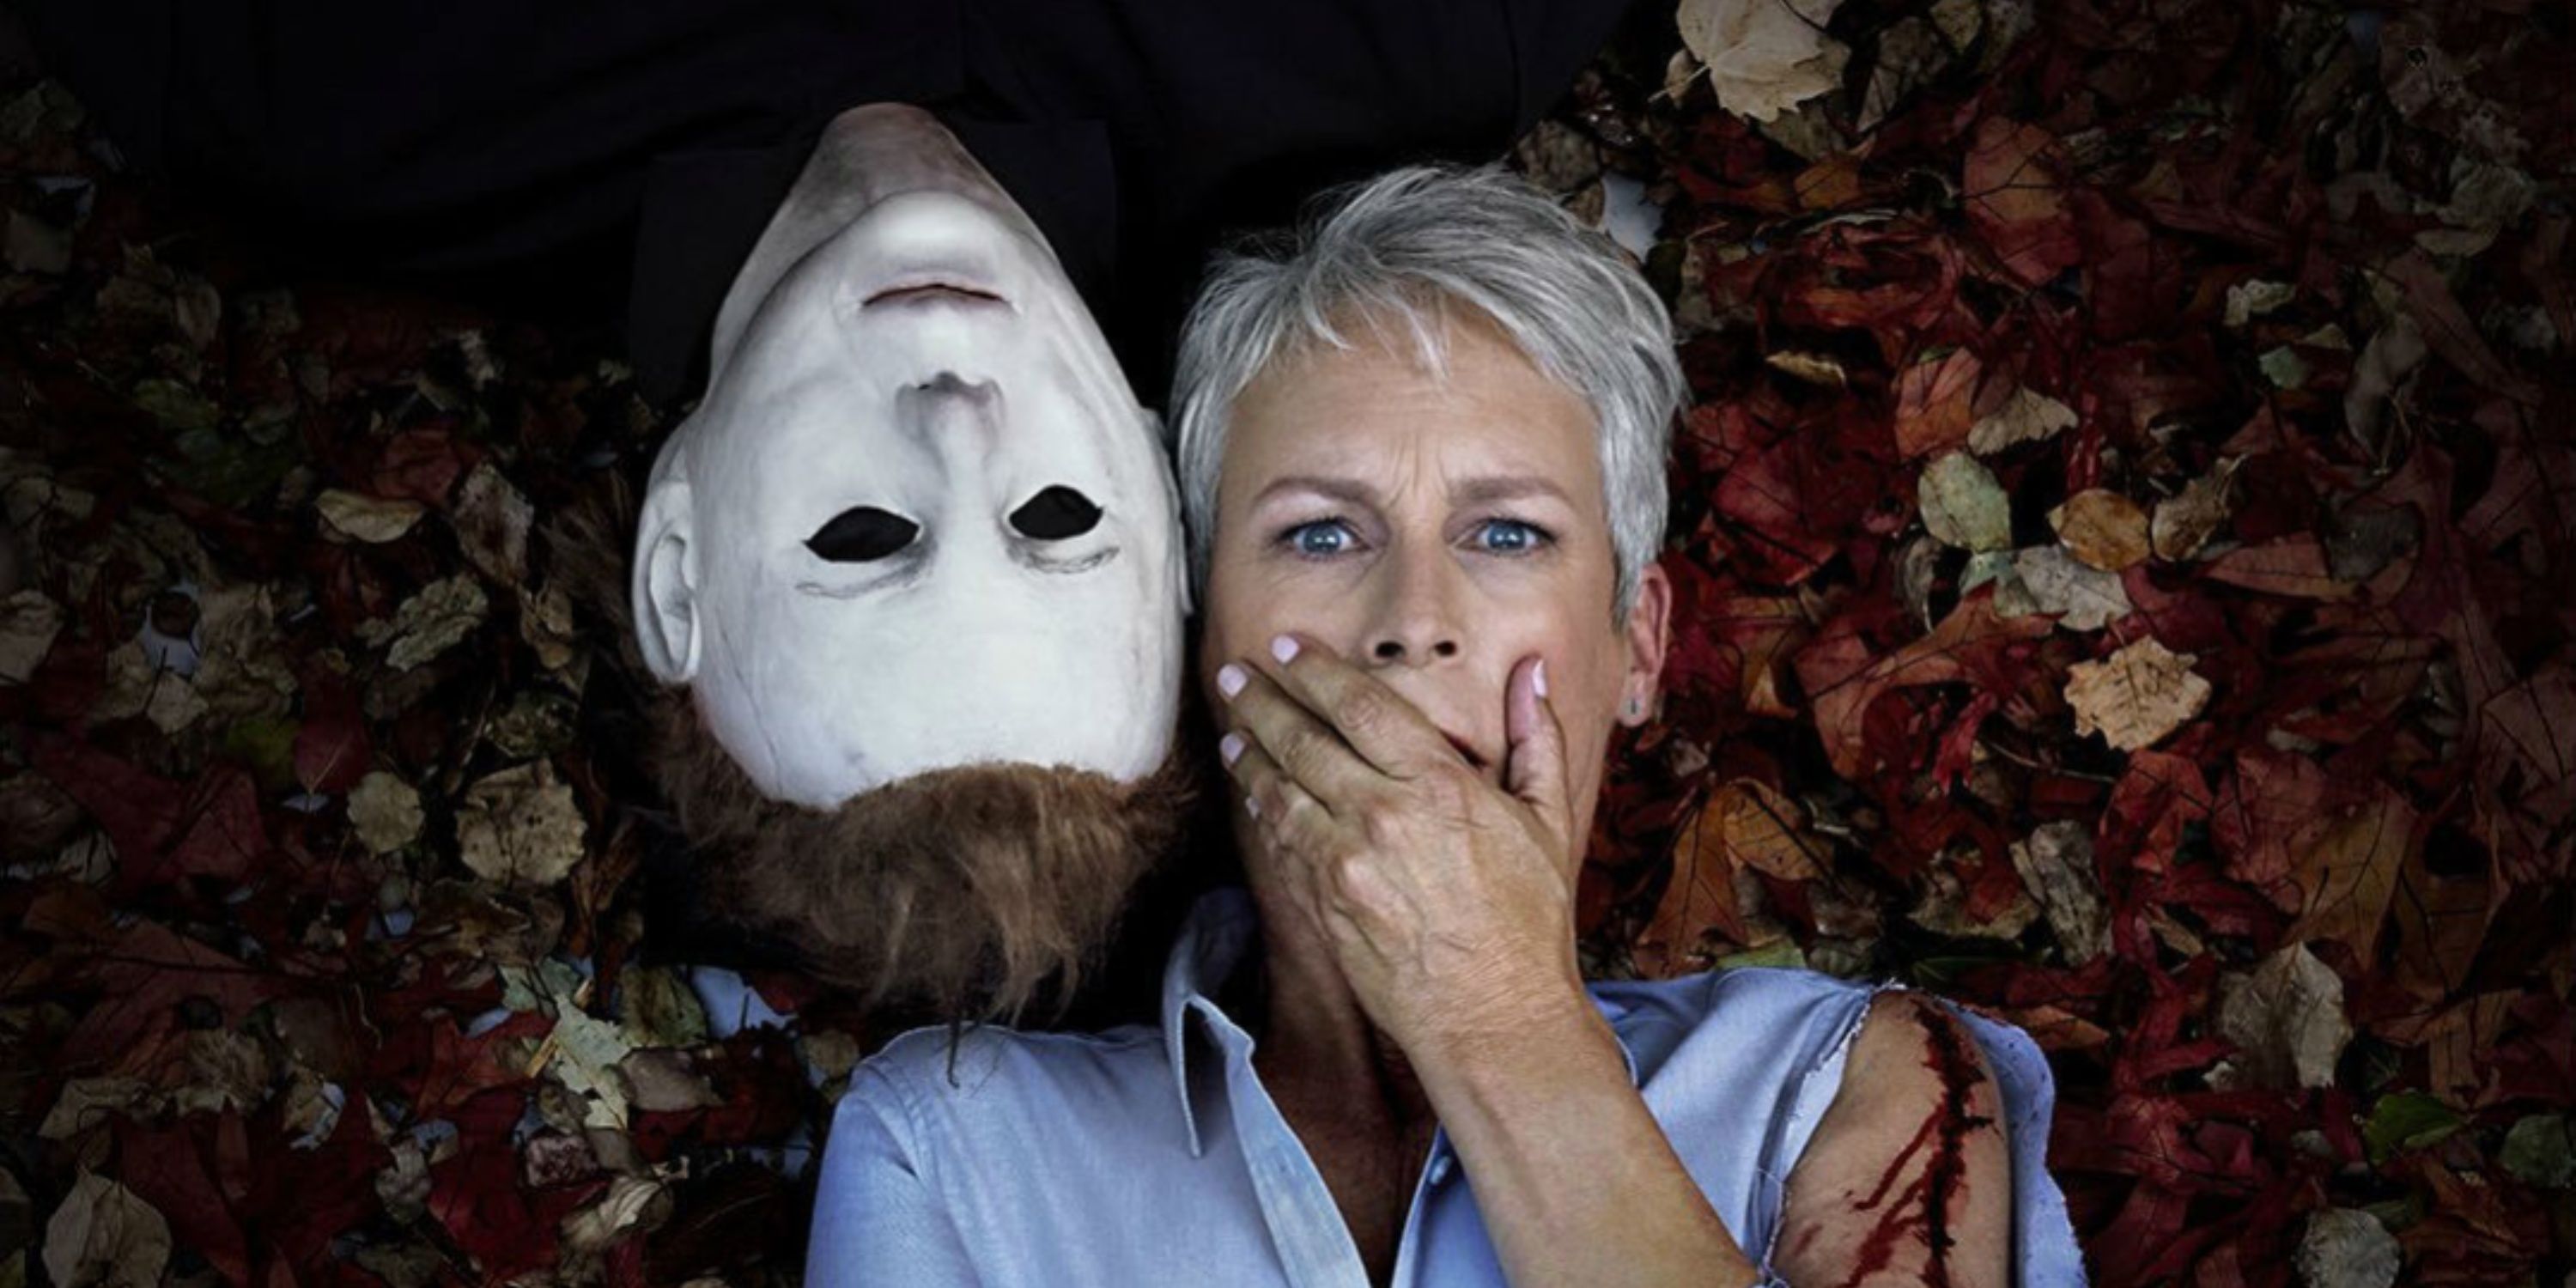 Michael Myers and Laura Strodie (played by Jamie Lee Curtis) lay next to each other in a promotional image for the Halloween franchise